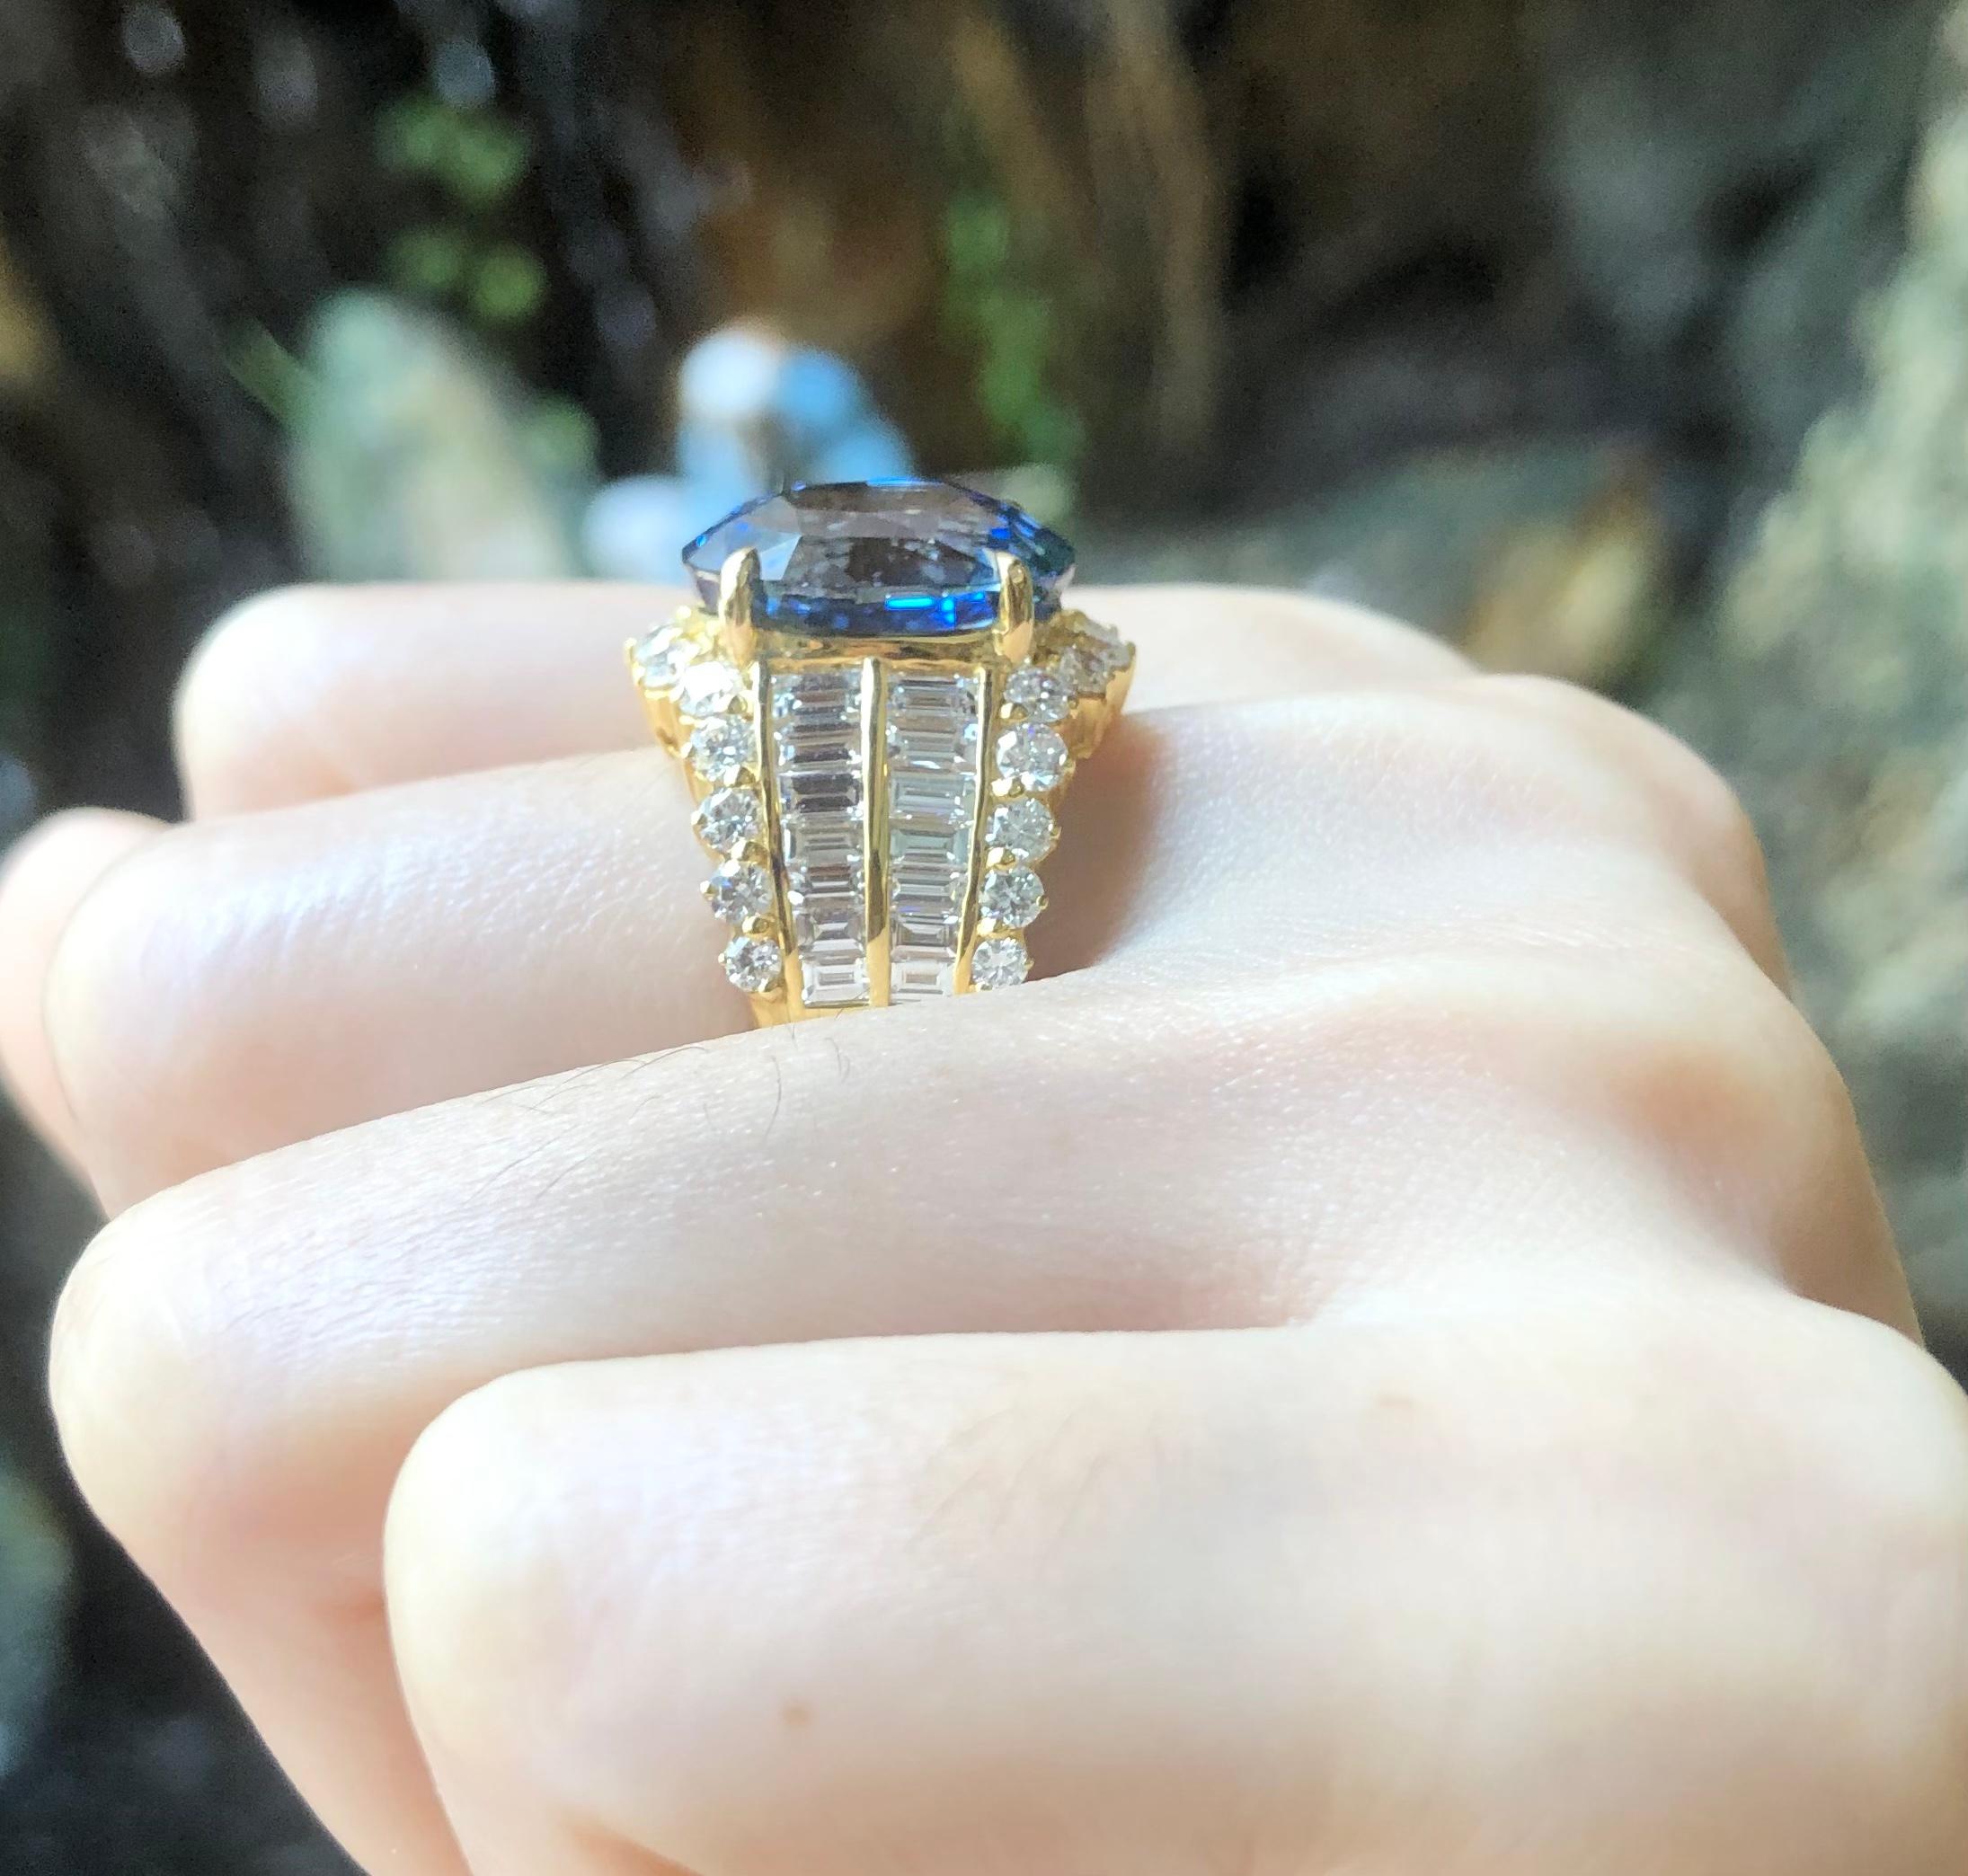 Blue Sapphire 11.41 carats with Diamond 3.08 carats Ring set in 18 Karat Gold Settings
(GRS Certified) 

Width:  1.1 cm 
Length: 1.8 cm
Ring Size: 54
Total Weight: 13.52 grams


